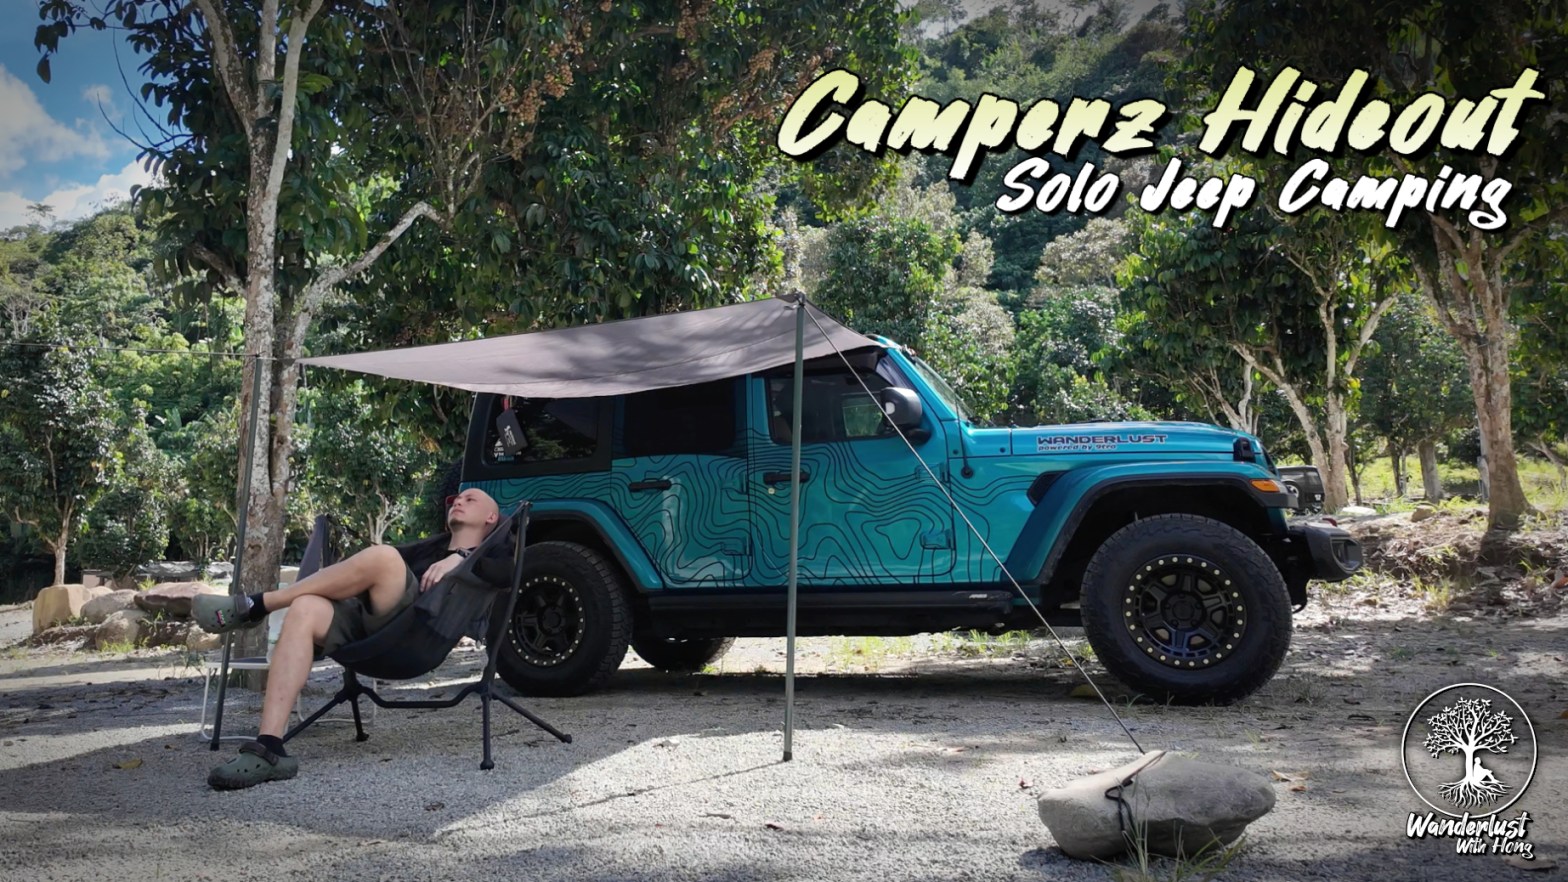 Camperz Hideout - Solo Jeep Camping